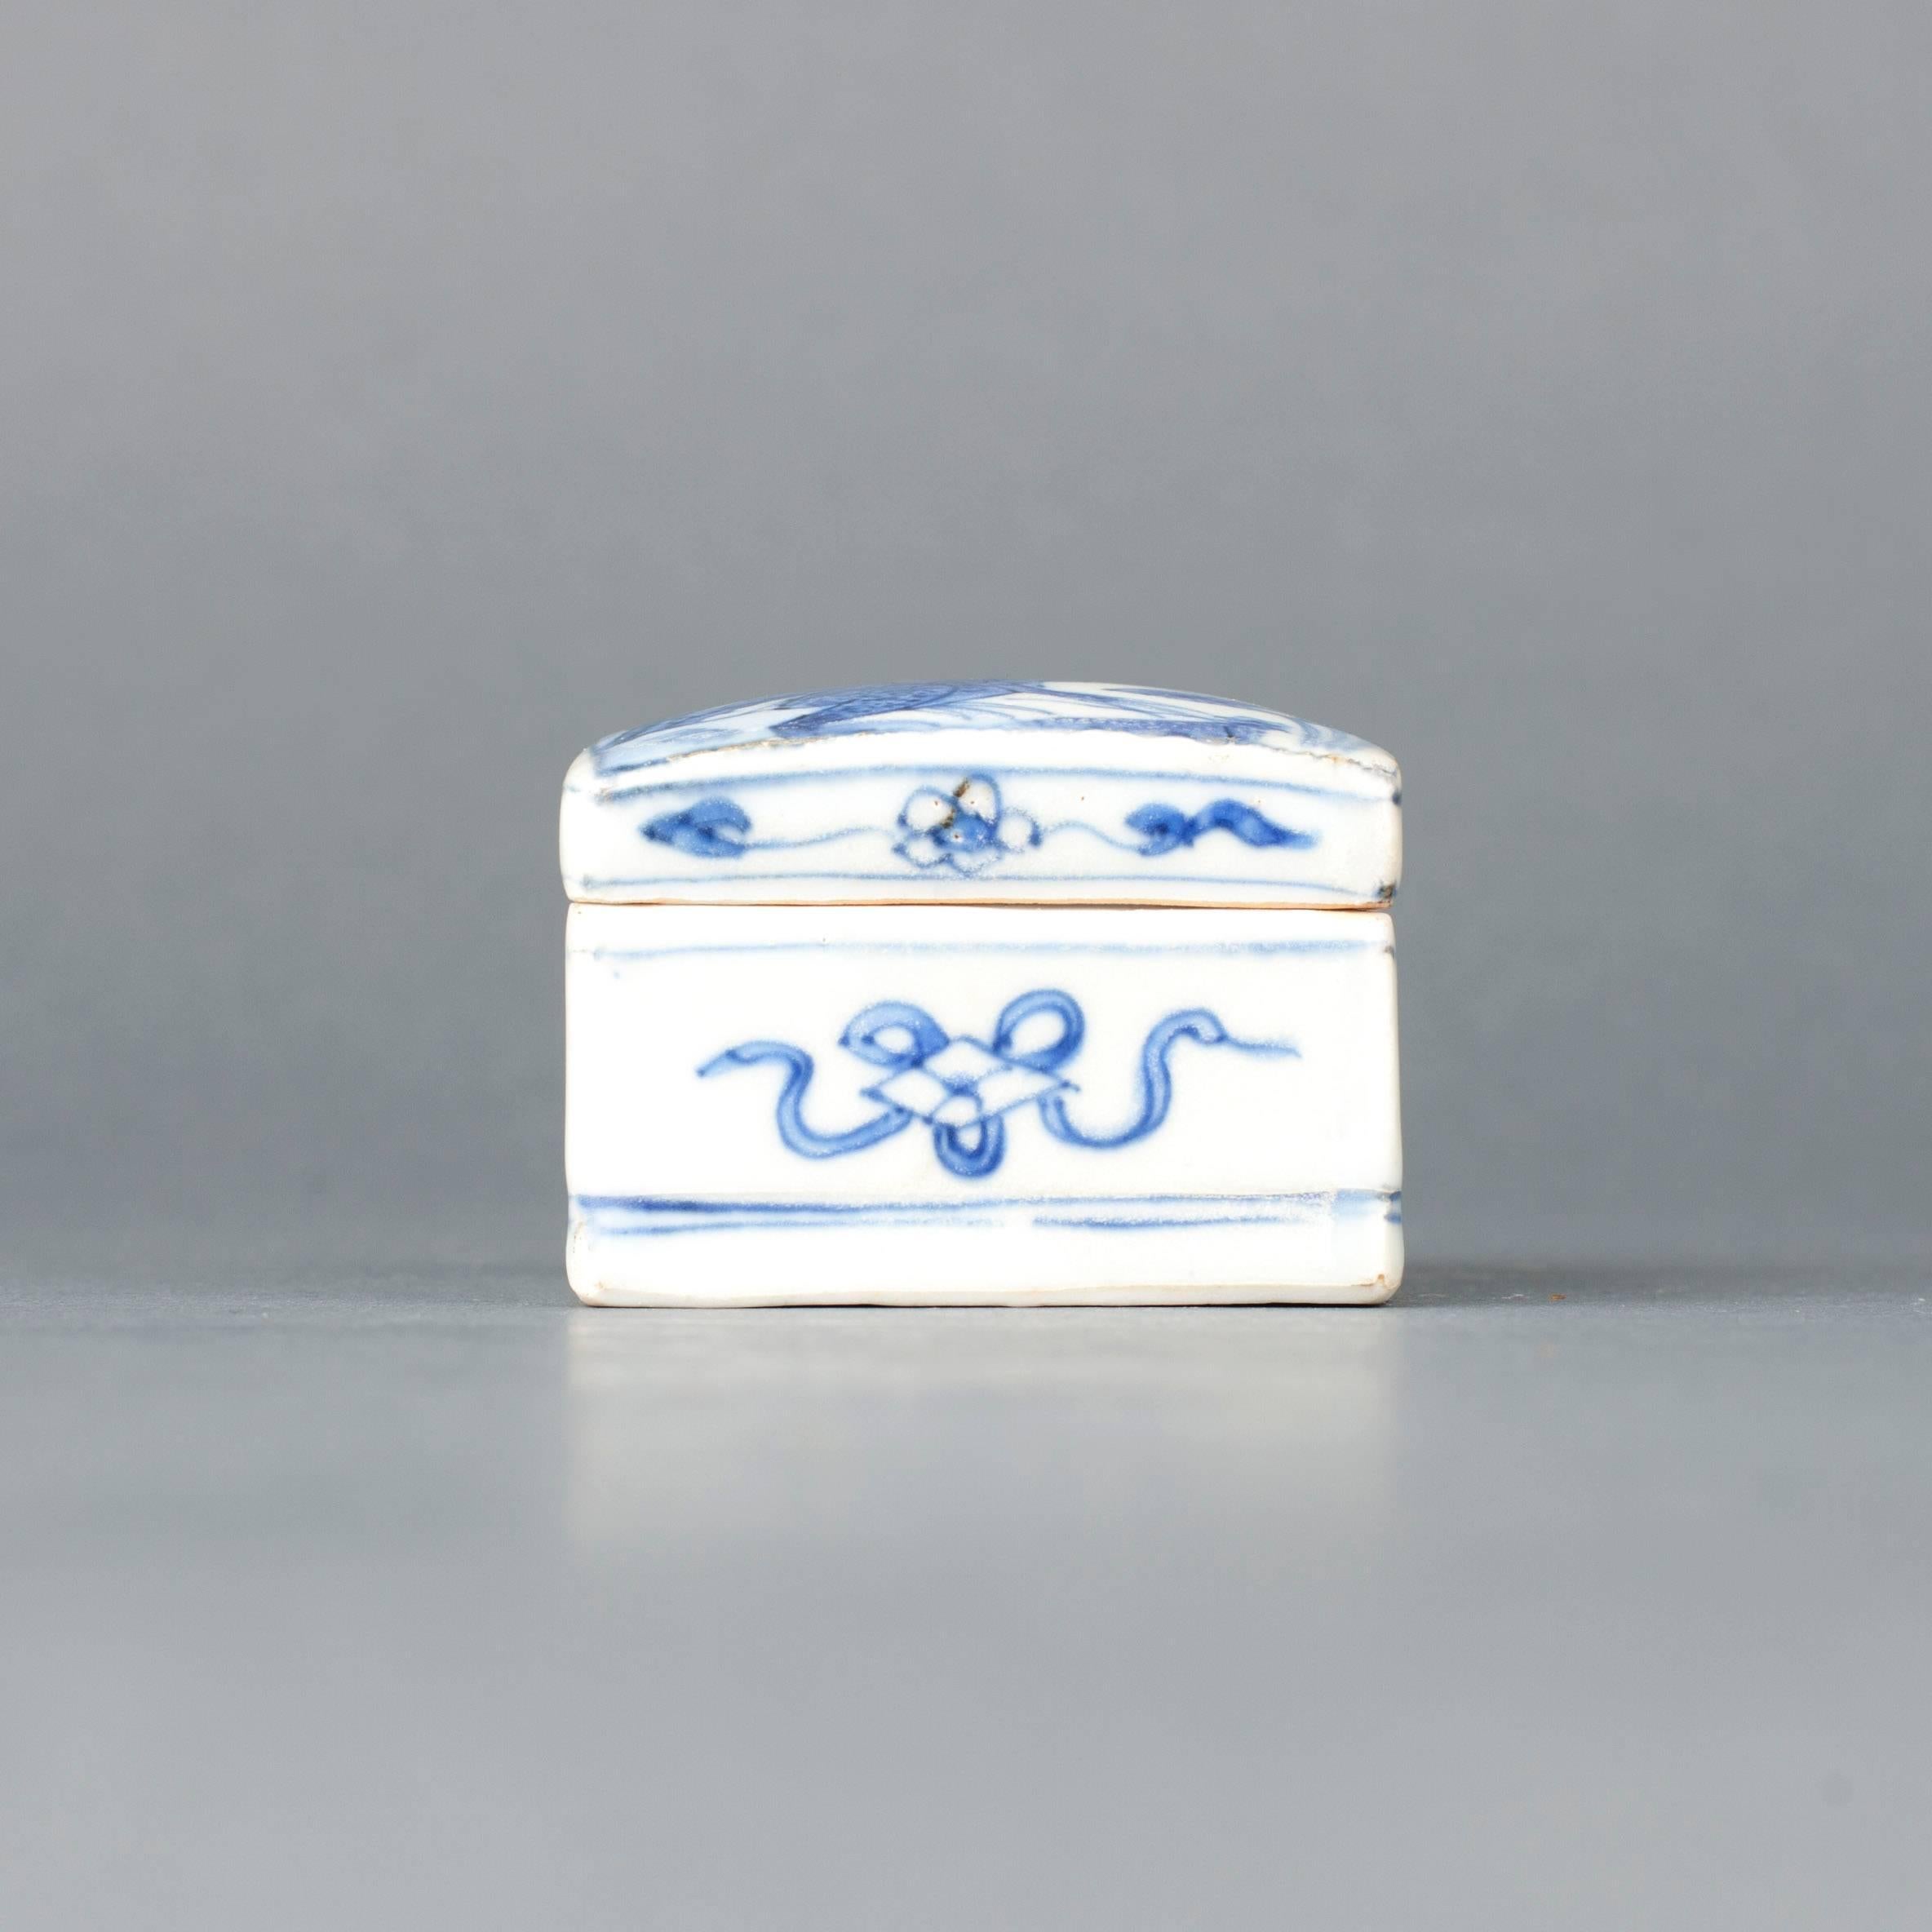 A rare Chinese porcelain Ming blue and white square box and cover, the slightly domed-shape cover painted with a seated frog looking up at the moon beside lotus and aquatic plants, the sides painted with blossoms and precious objects.

Measures: 2